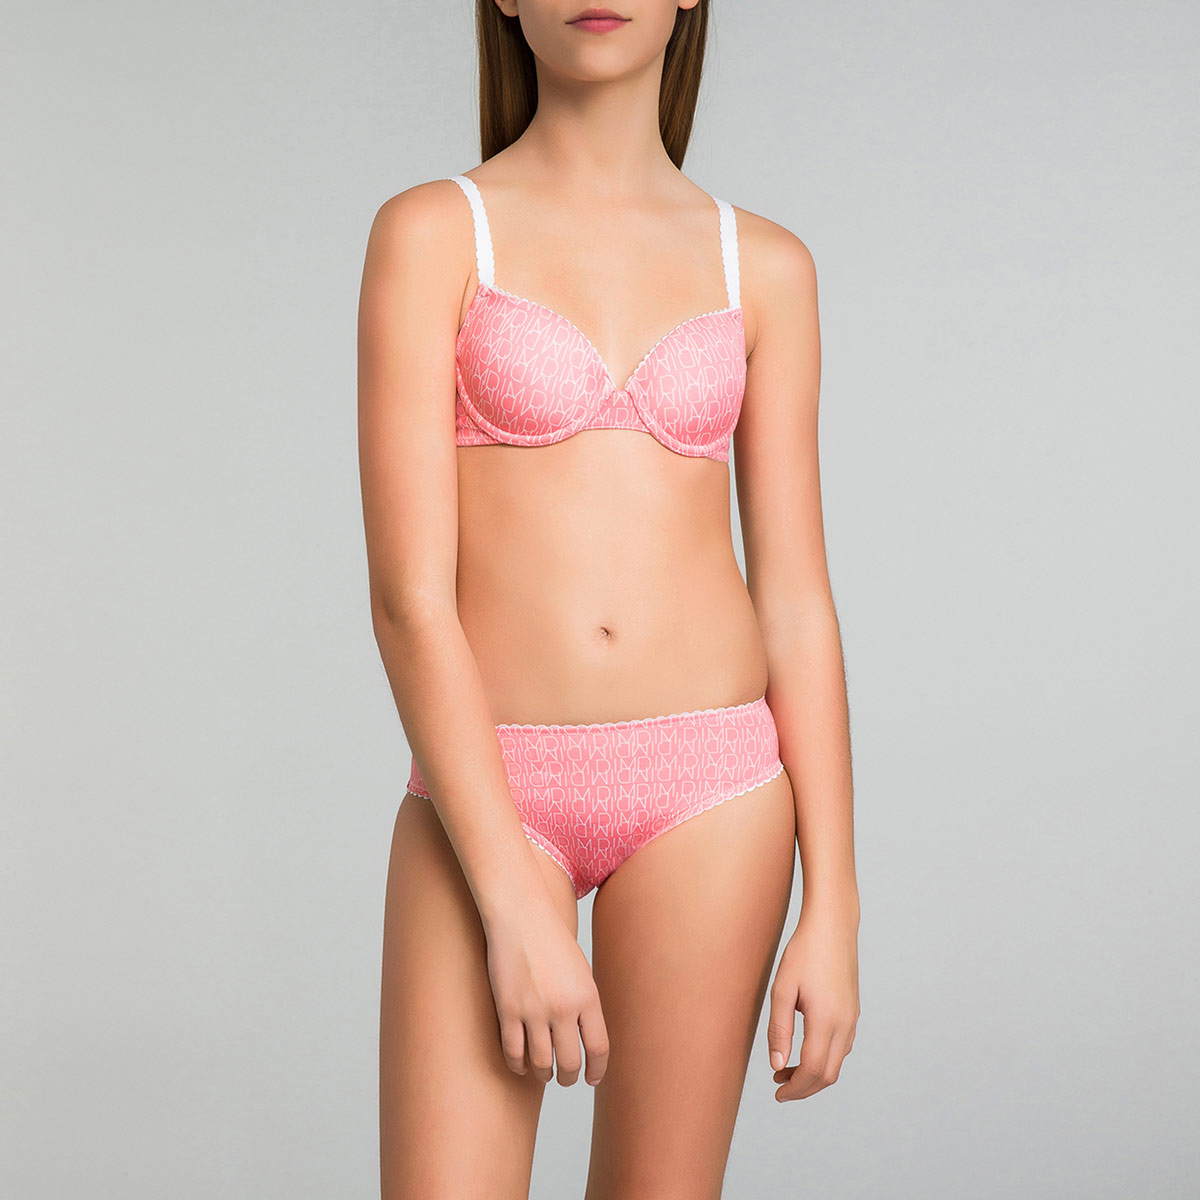 Mheandi-Pink Full Coverage Non-padded C-Cup Bra